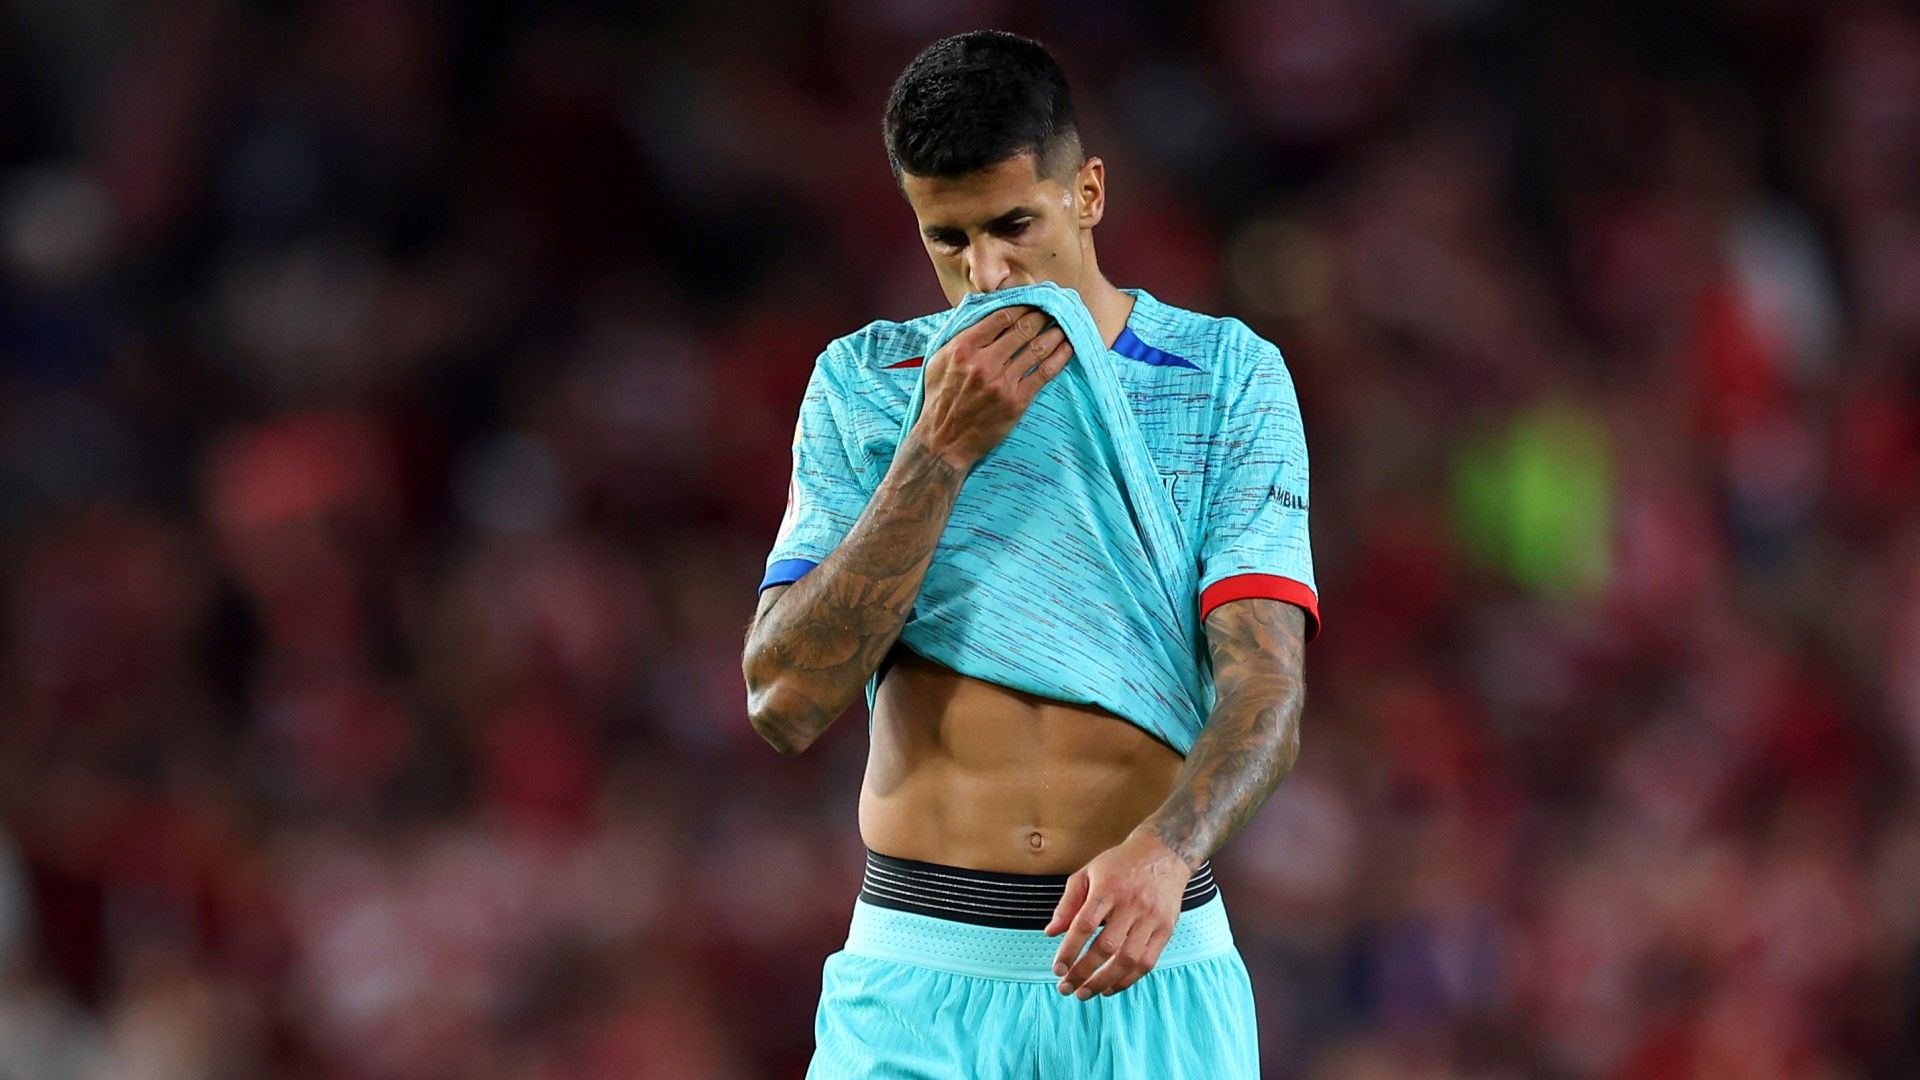 kicked out by pep guardiola, snubbed by bayern munich and in the firing line at barcelona - what next for man city outcast joao cancelo?